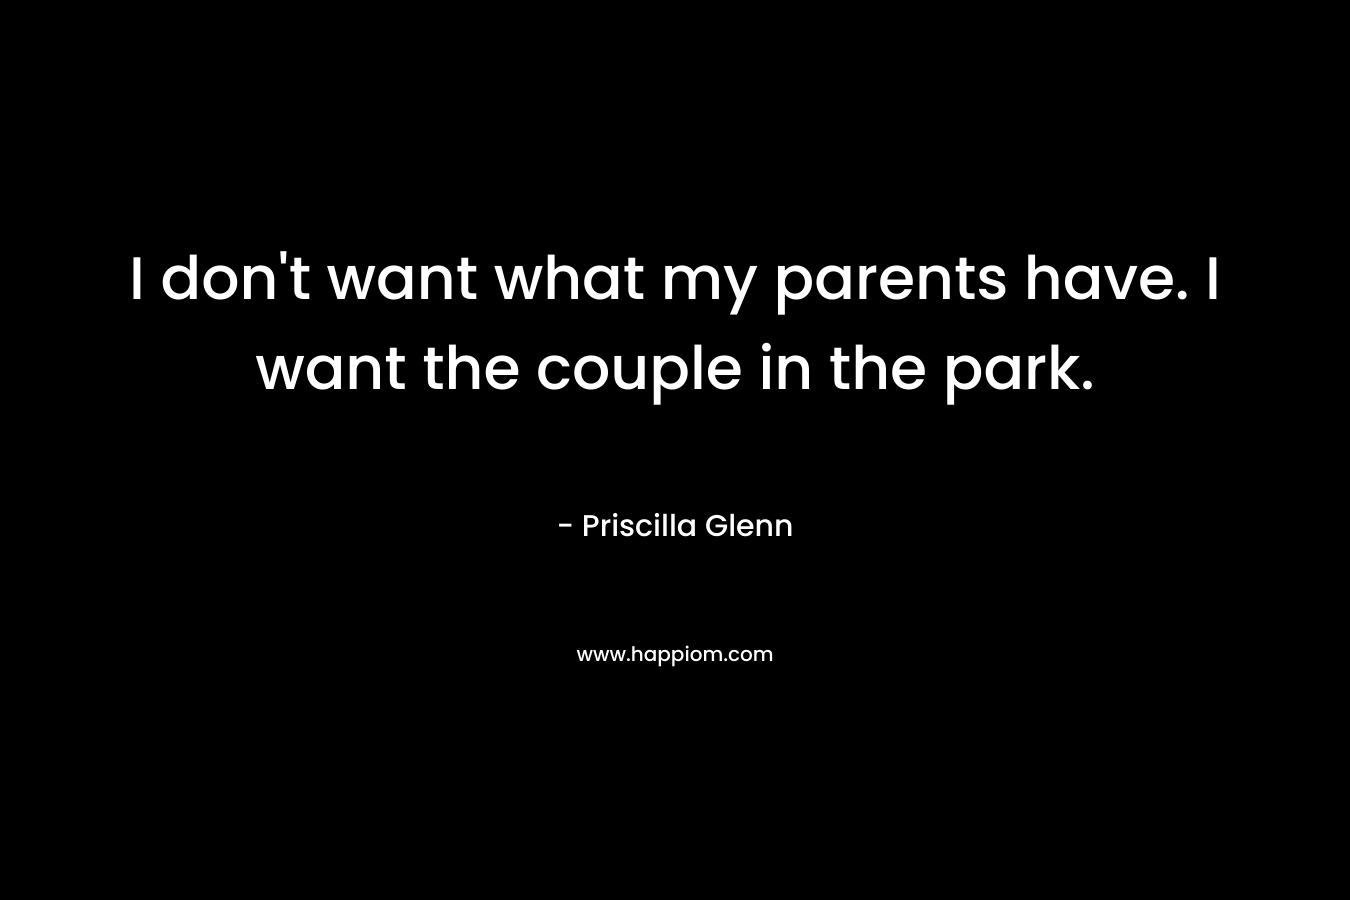 I don't want what my parents have. I want the couple in the park.